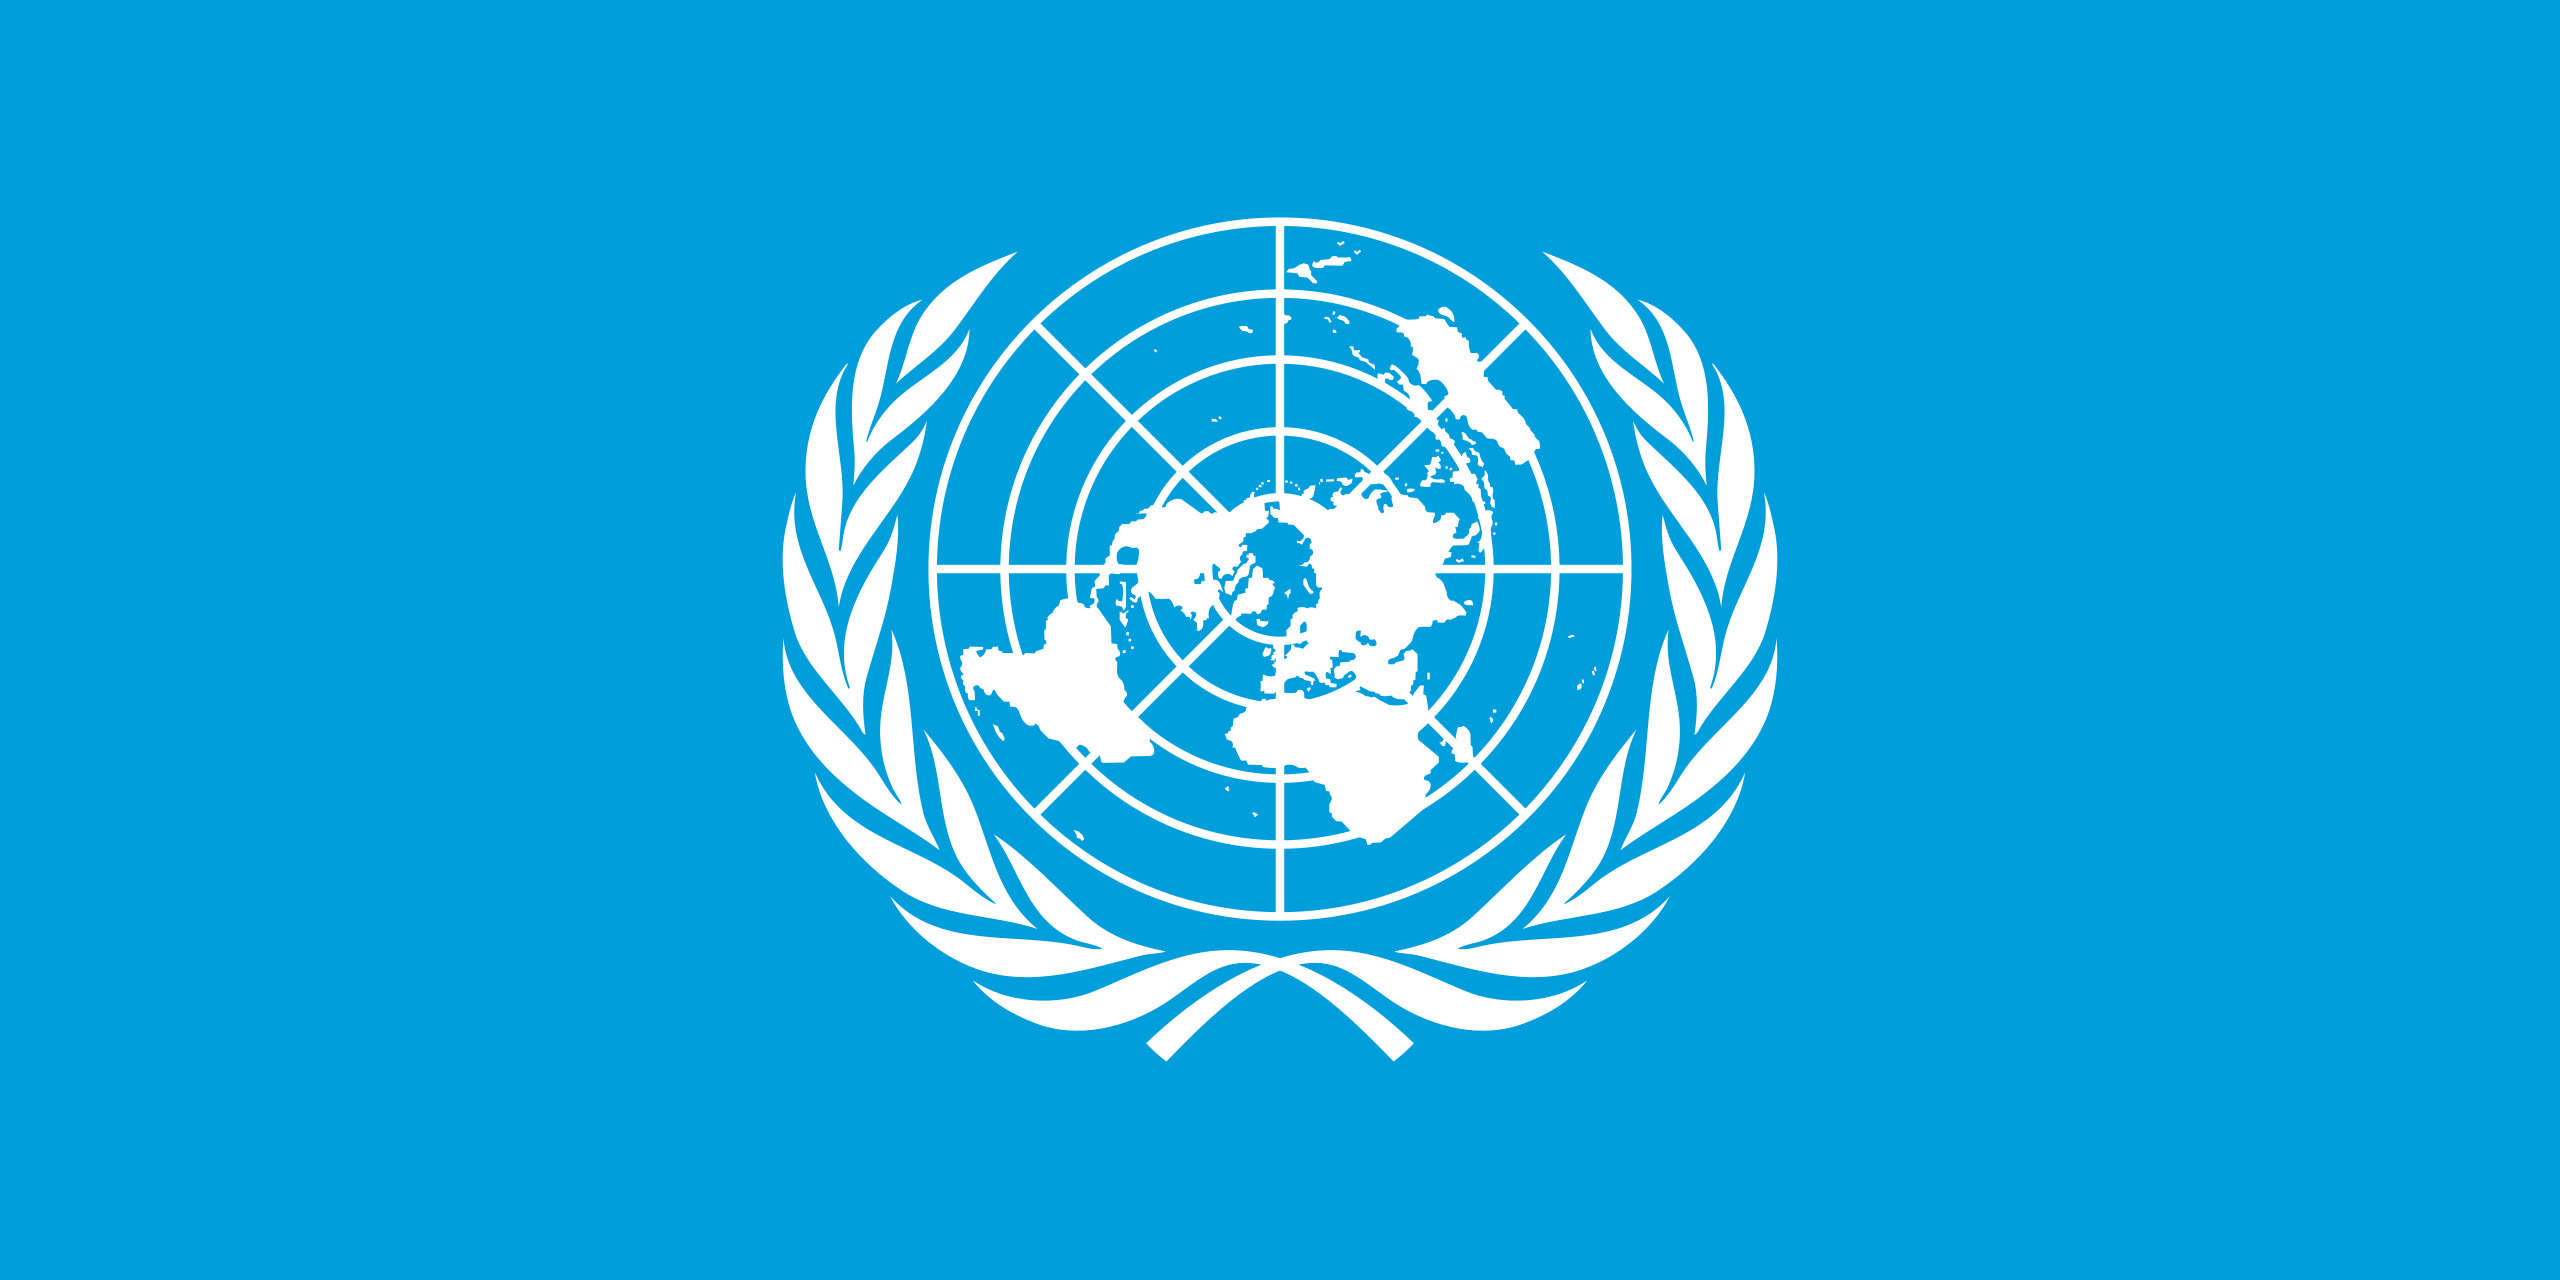 UN agencies launch joint emergency response to Jajarkot earthquake